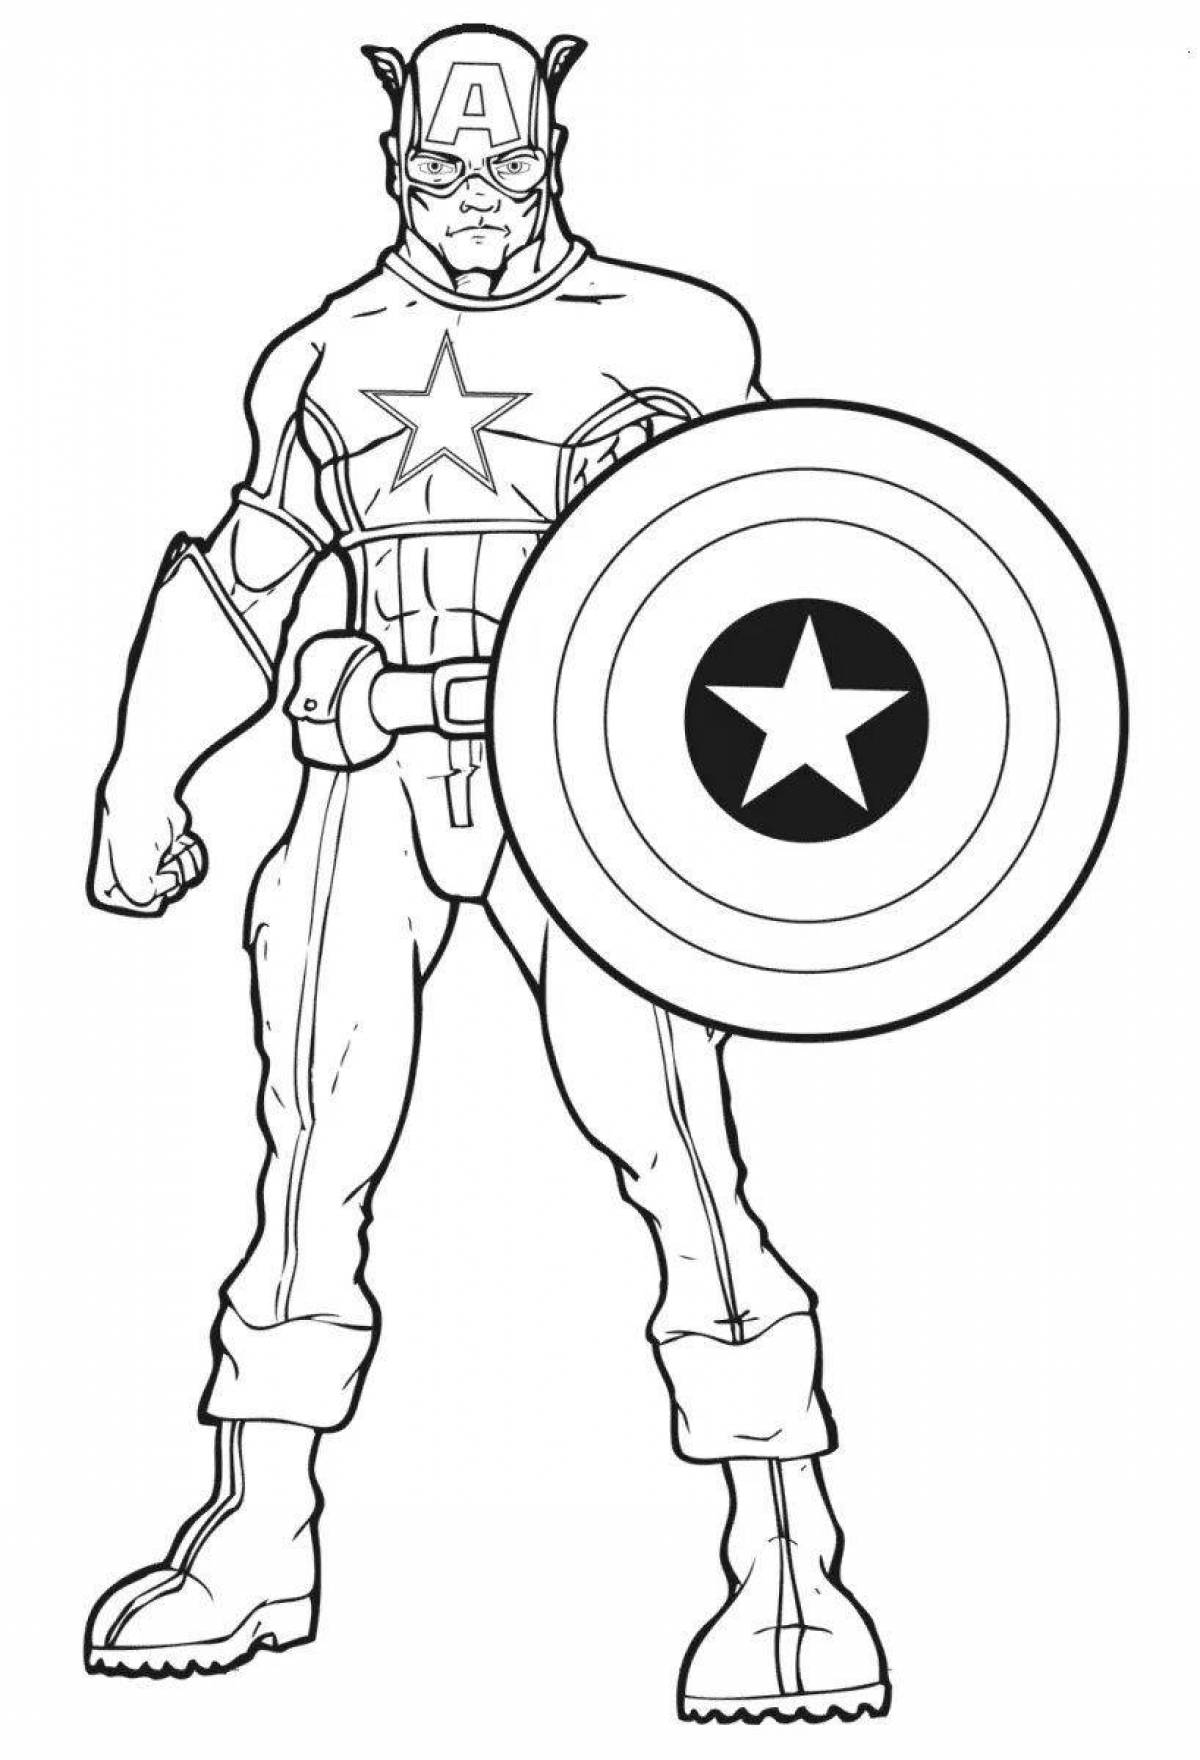 Outstanding captain america coloring book